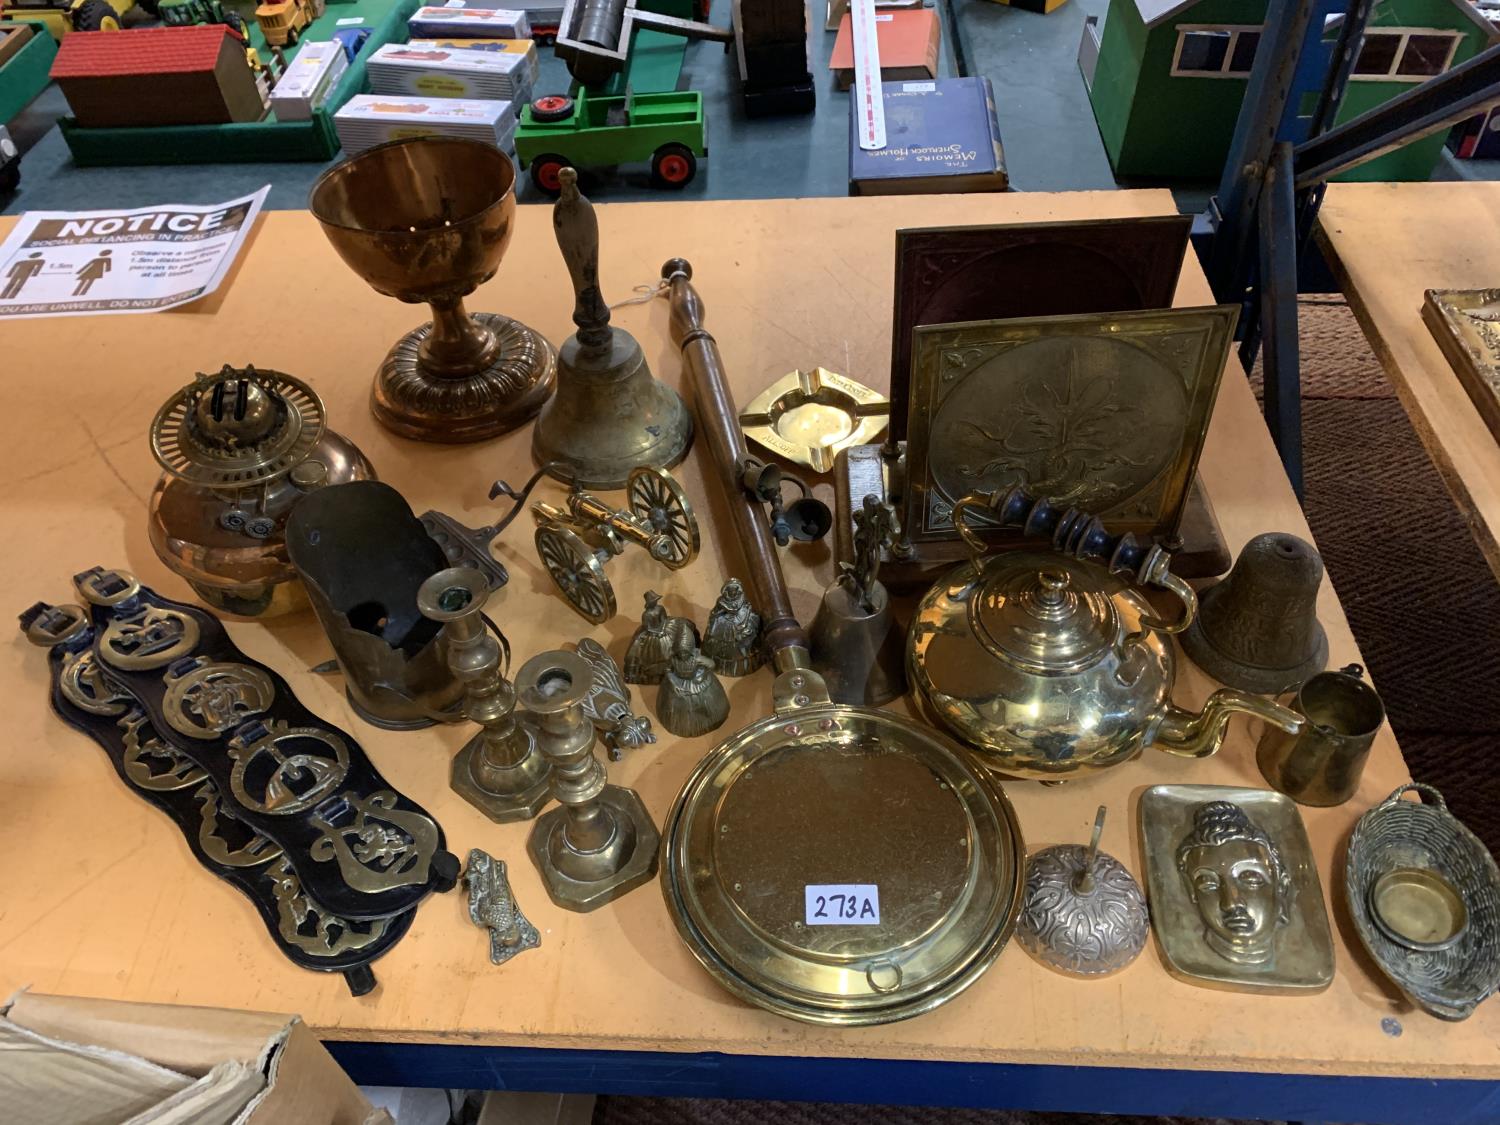 A LARGE QUANTITY OF BRASSWARE TO INCLUDE A BELL, HORSE BRASSES, KETTLE, CANDLESTICKS, CANNON, LAMP - Image 3 of 12